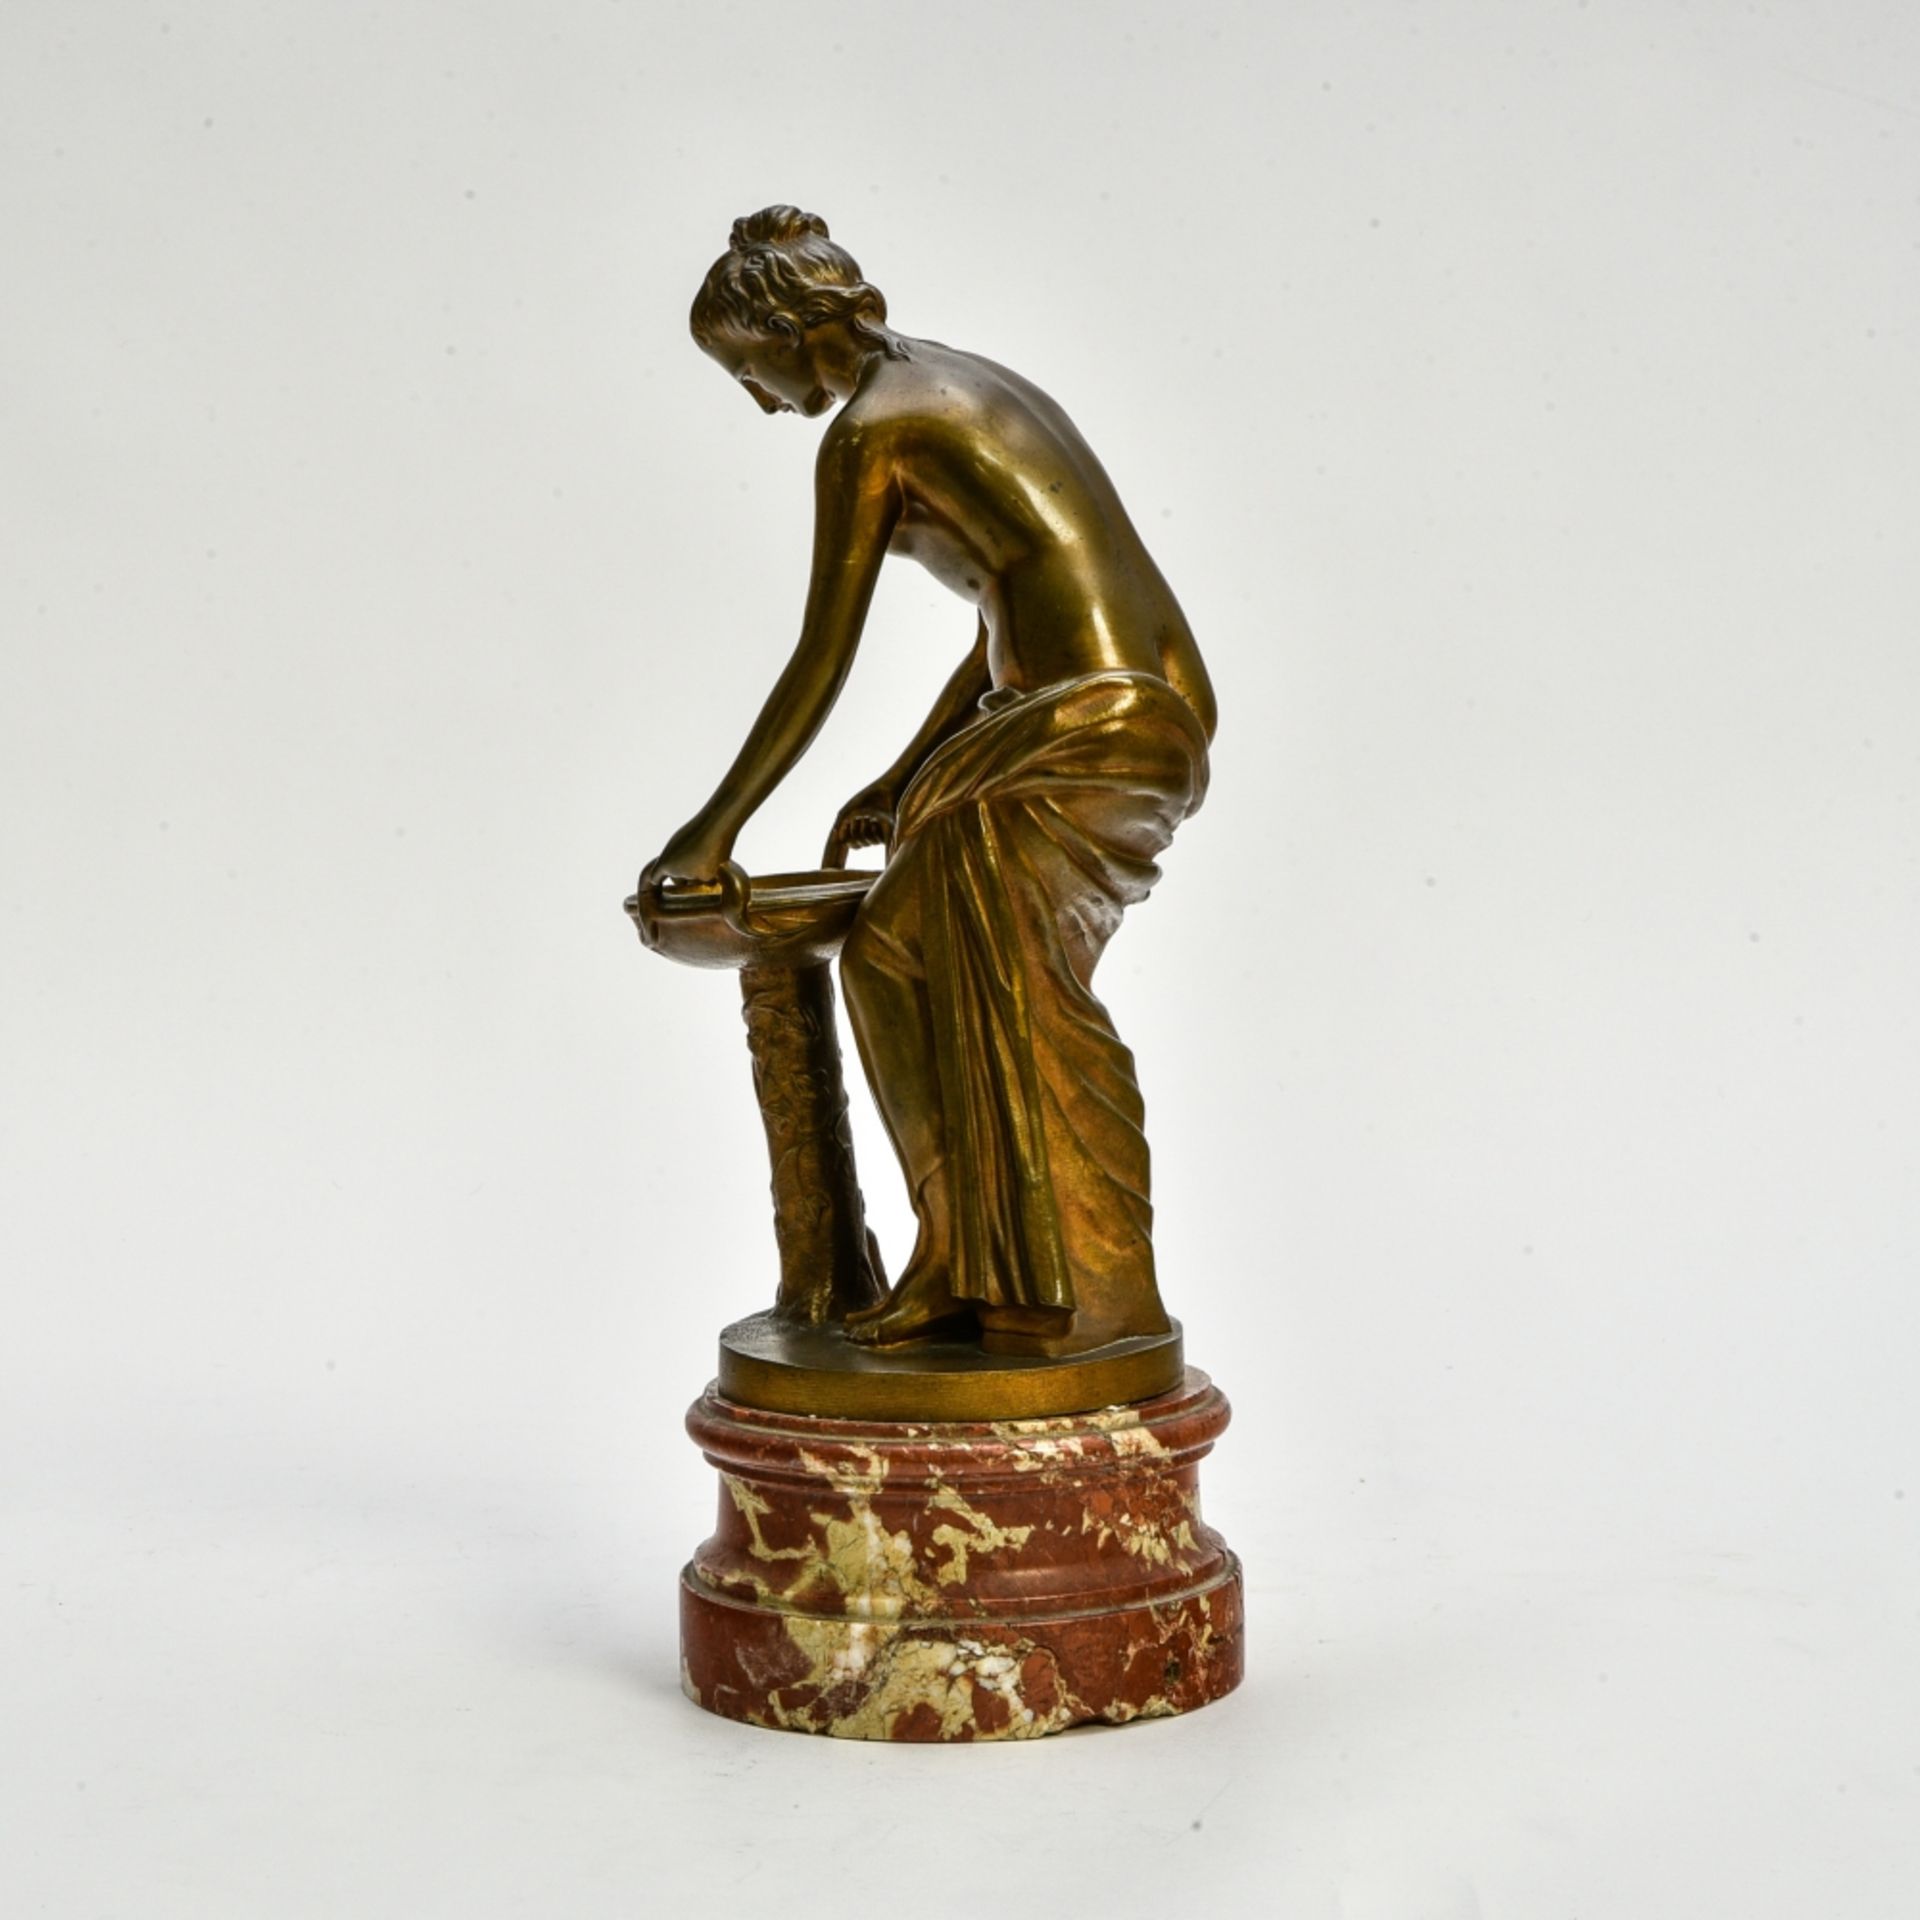 Vintage woman doing her toilette 20TH CENTURY WORK Bronze sculpture with golden patina. Red marble - Image 3 of 3